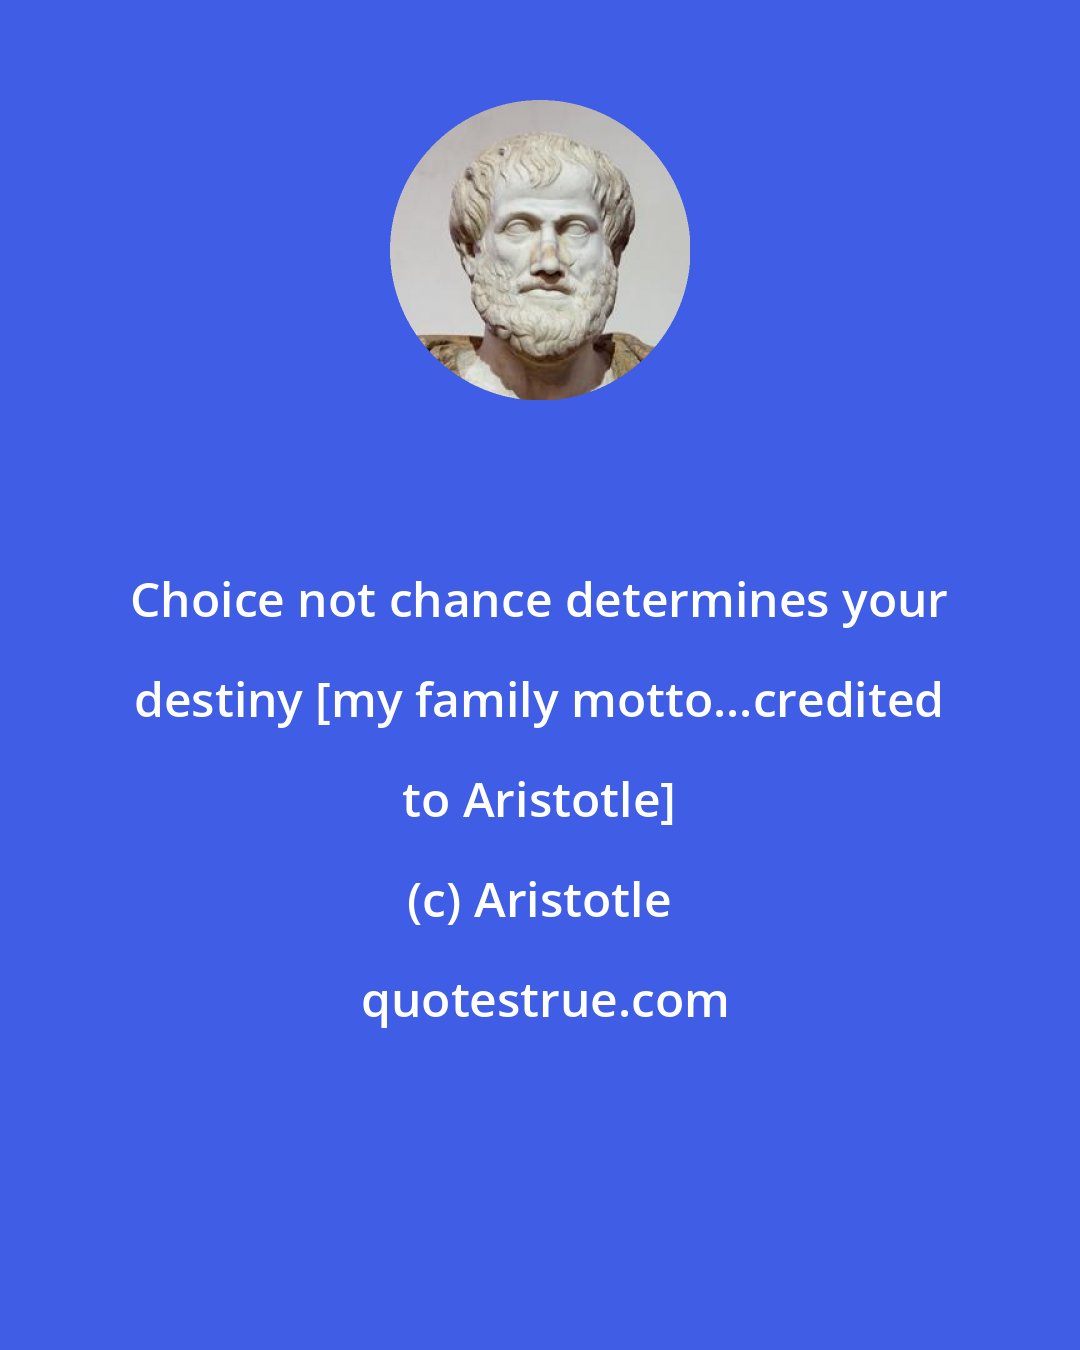 Aristotle: Choice not chance determines your destiny [my family motto...credited to Aristotle]